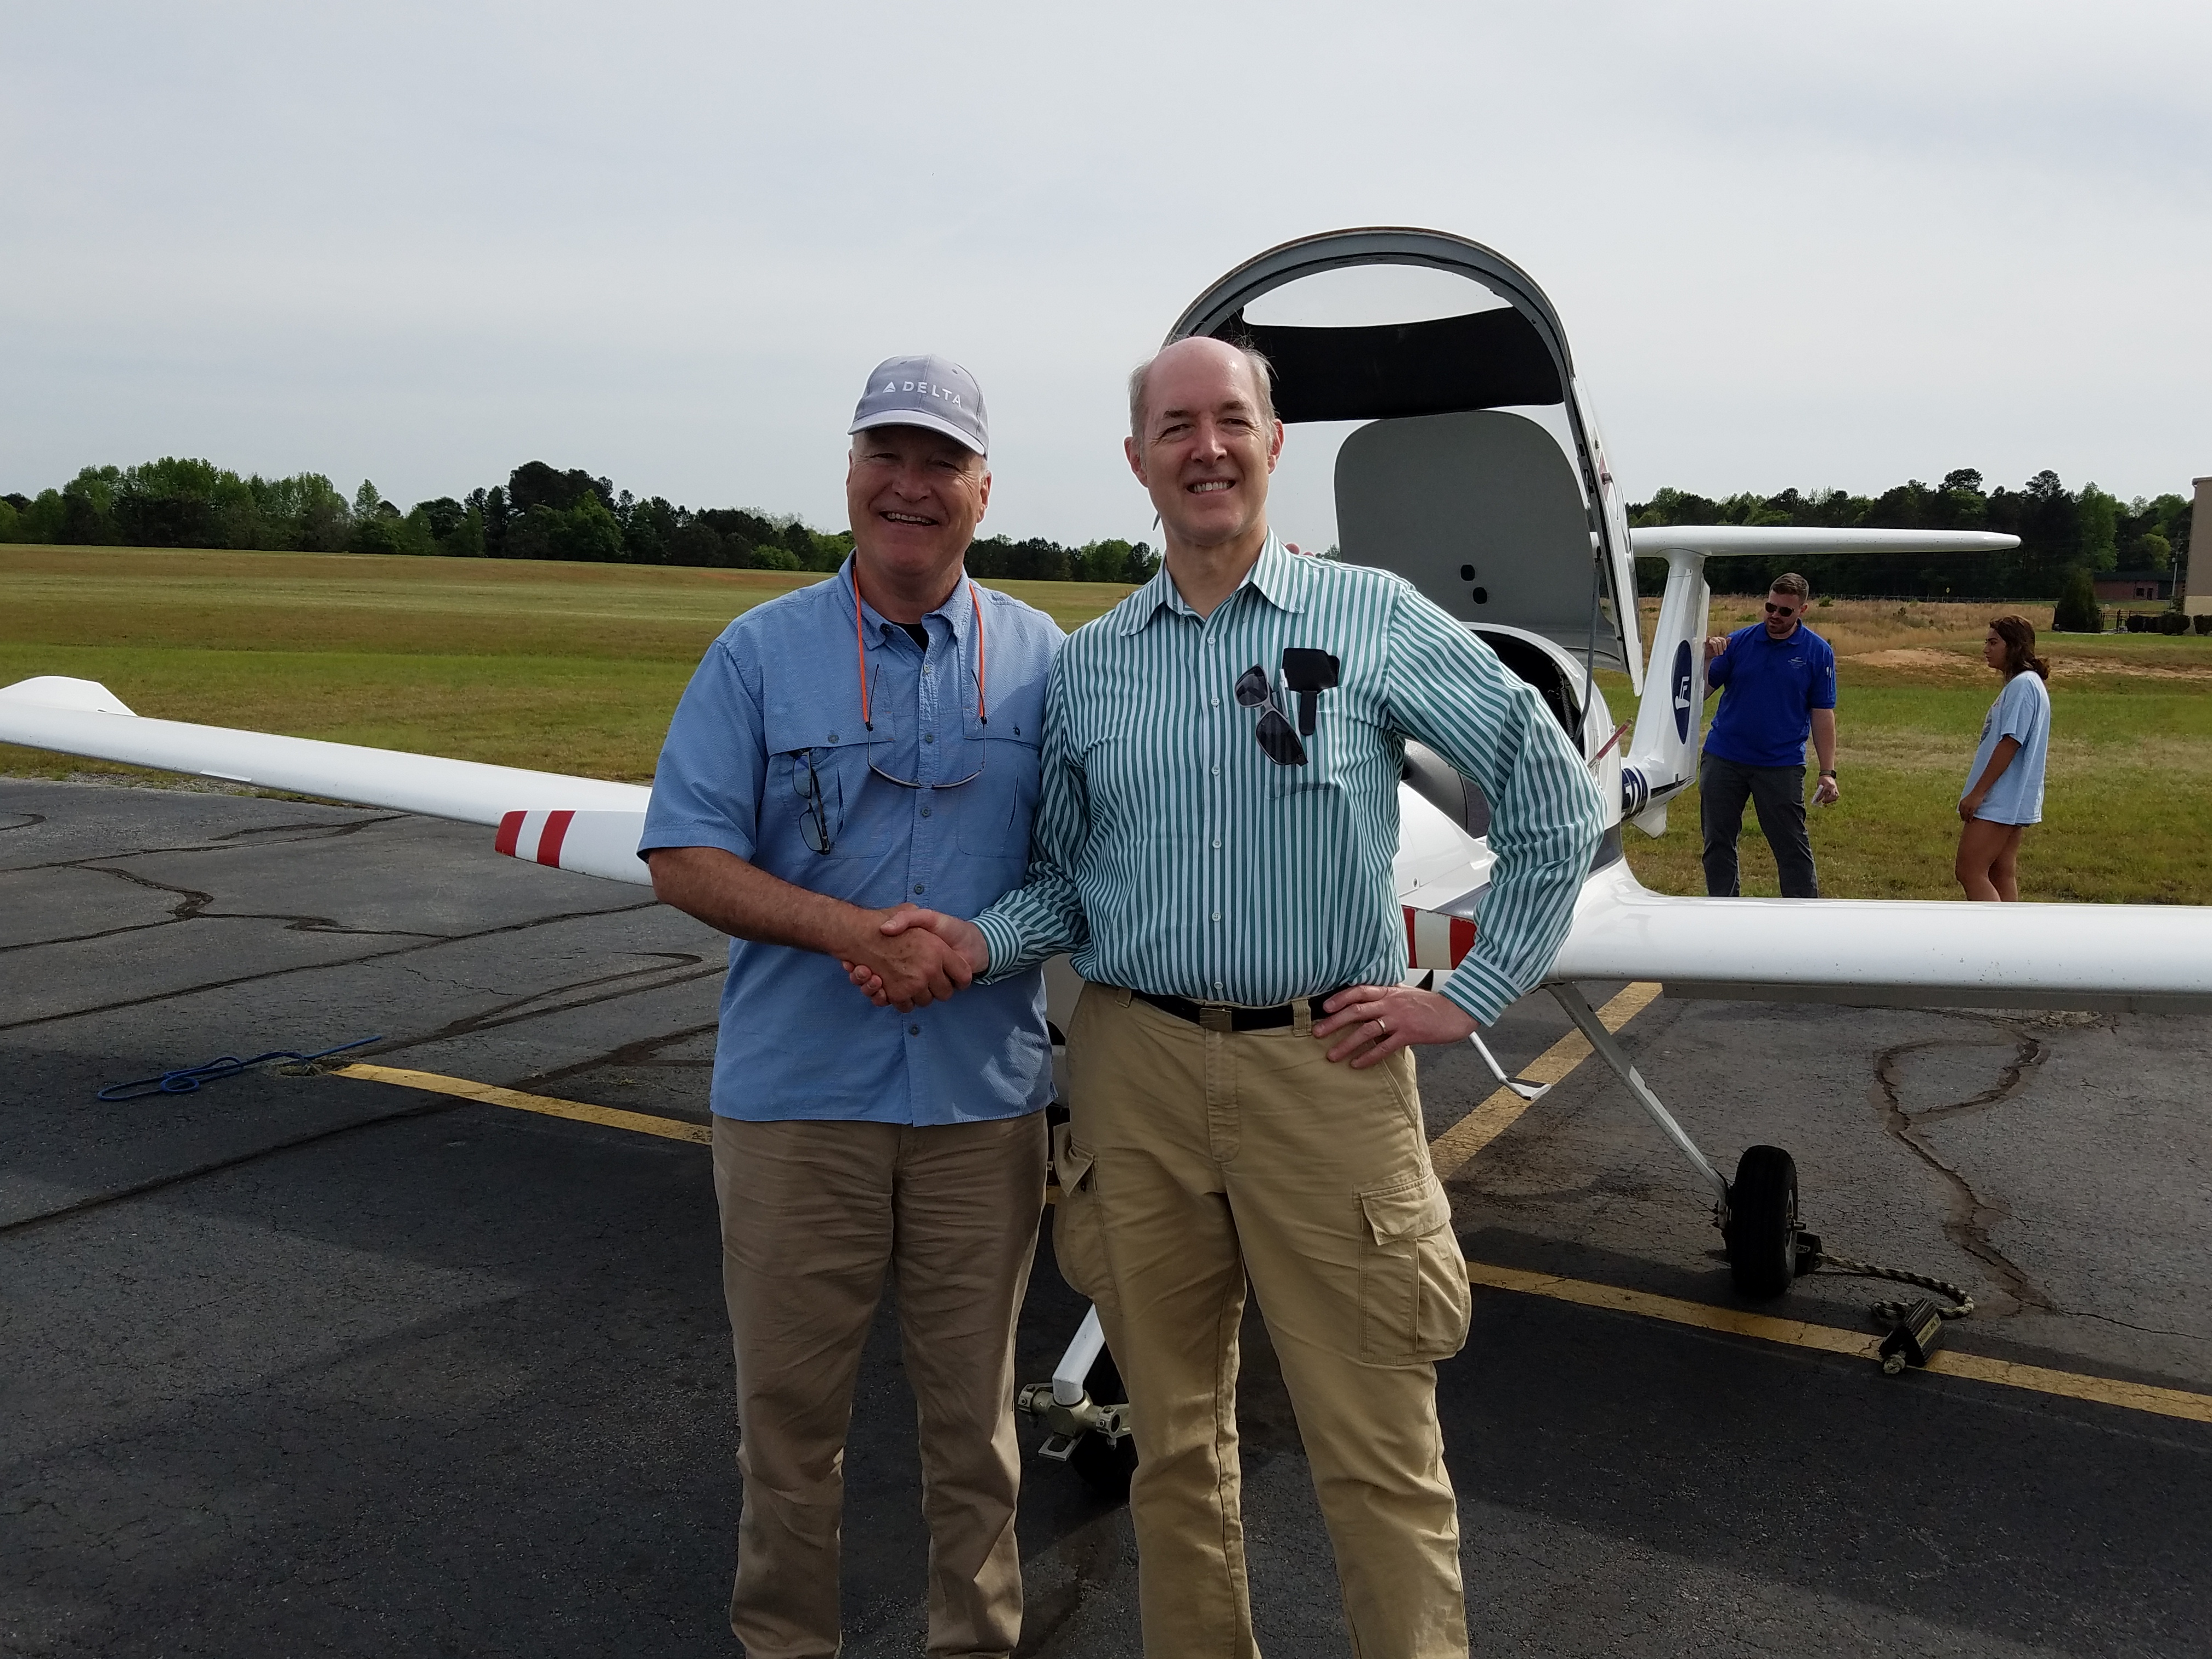 Ron, the FAA Examiner (who is an Airline Captain for Delta), congratulates me after our check ride together